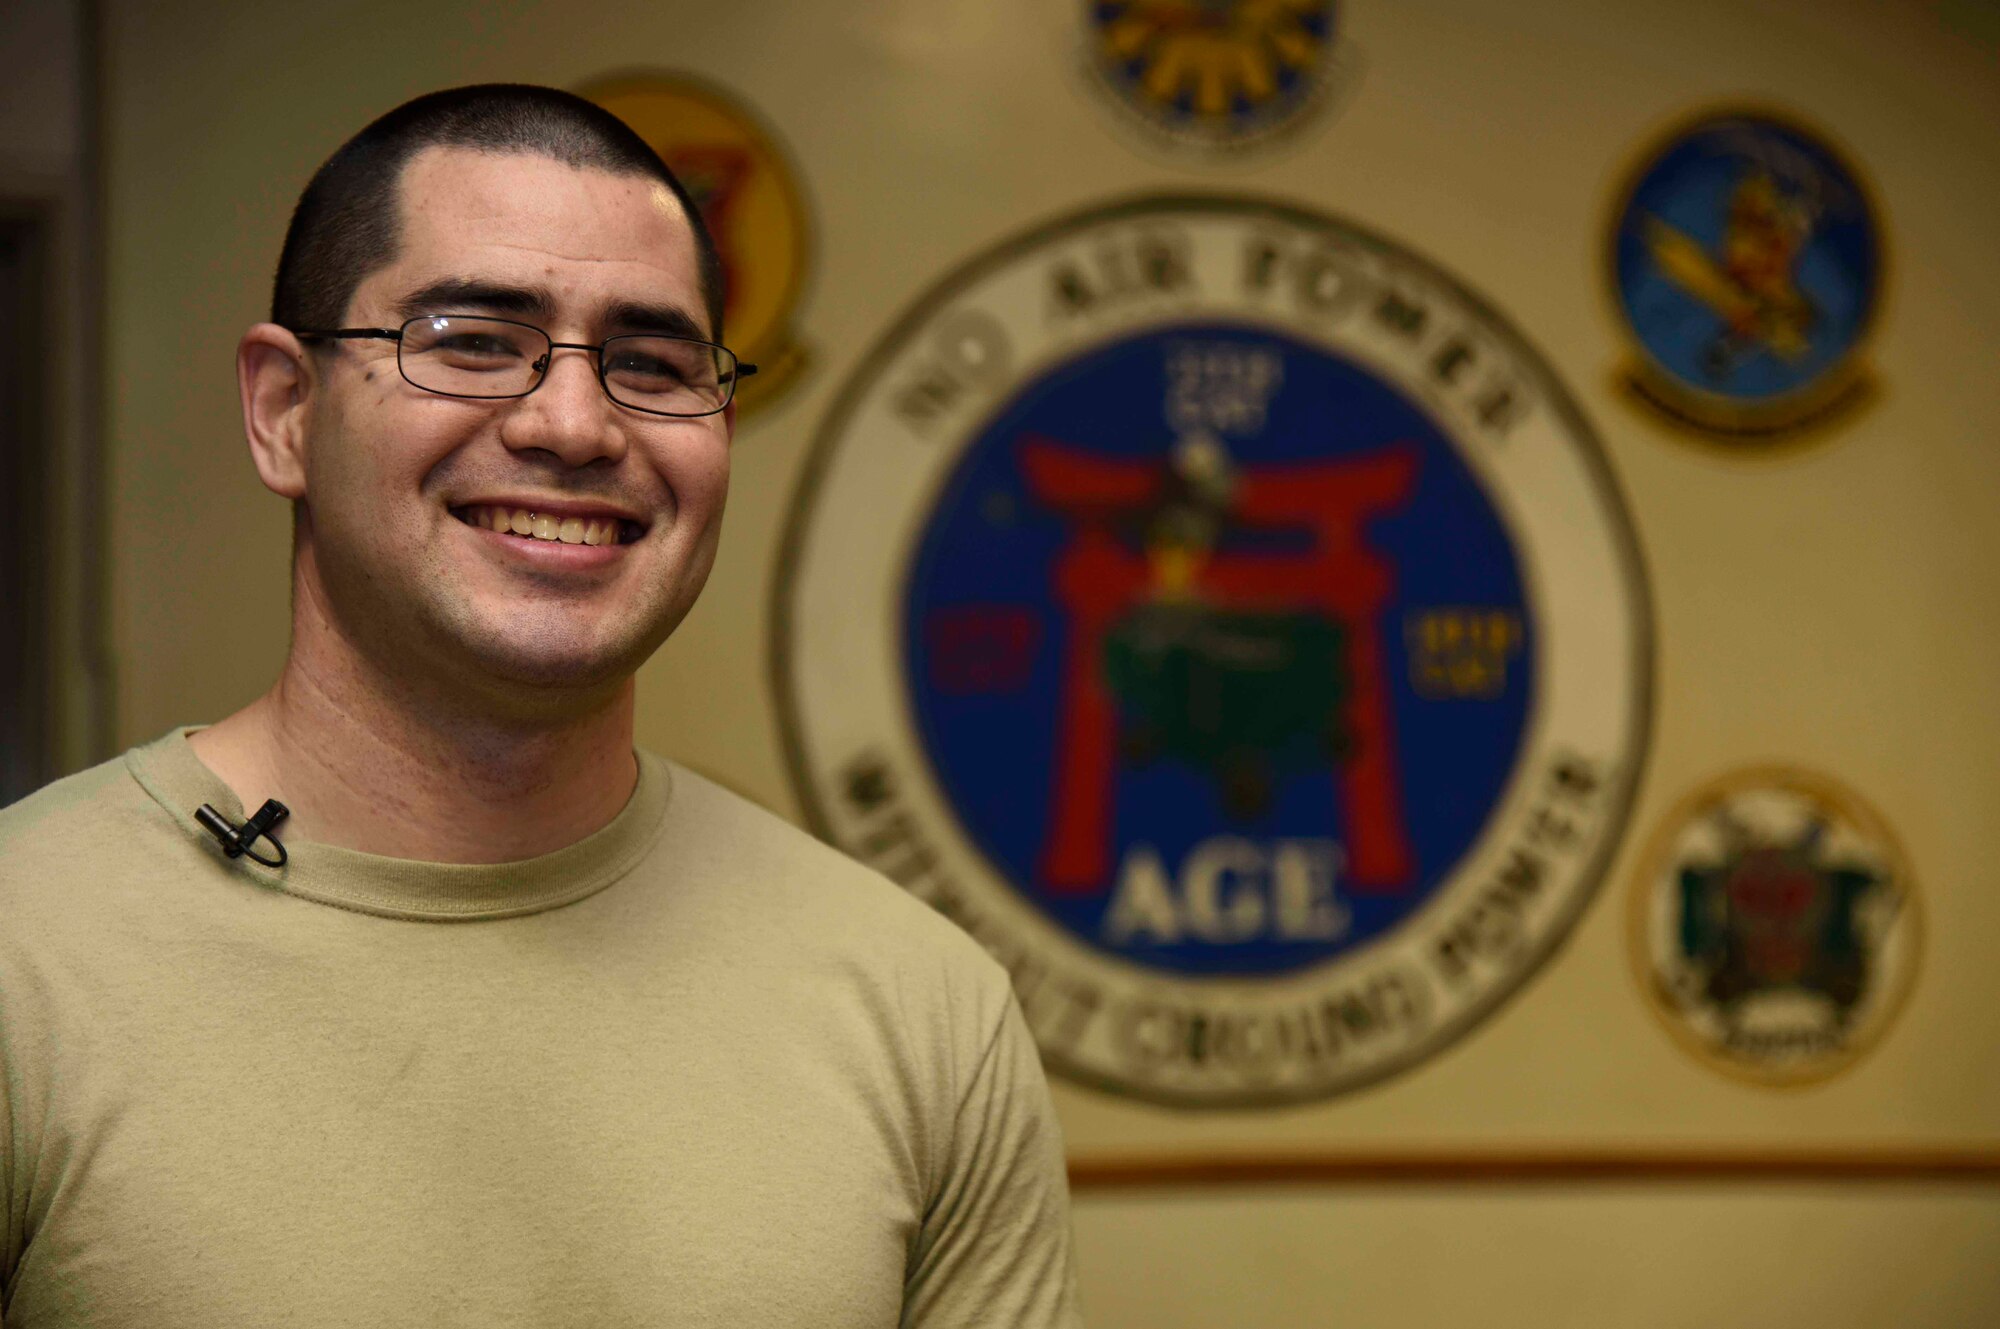 U.S. Air Force Airman 1st Class Taylor Moore, 35th Maintenance Squadron aerospace ground equipment journeyman, poses for a picture at Misawa Air Base, Japan, Dec. 2, 2015. Moore was chosen for Wild Weasel of the Week based on superior performance, outstanding work ethic and overall good conduct and discipline. (U.S. Air Force photo by Airman 1st Class Jordyn Fetter/Released)